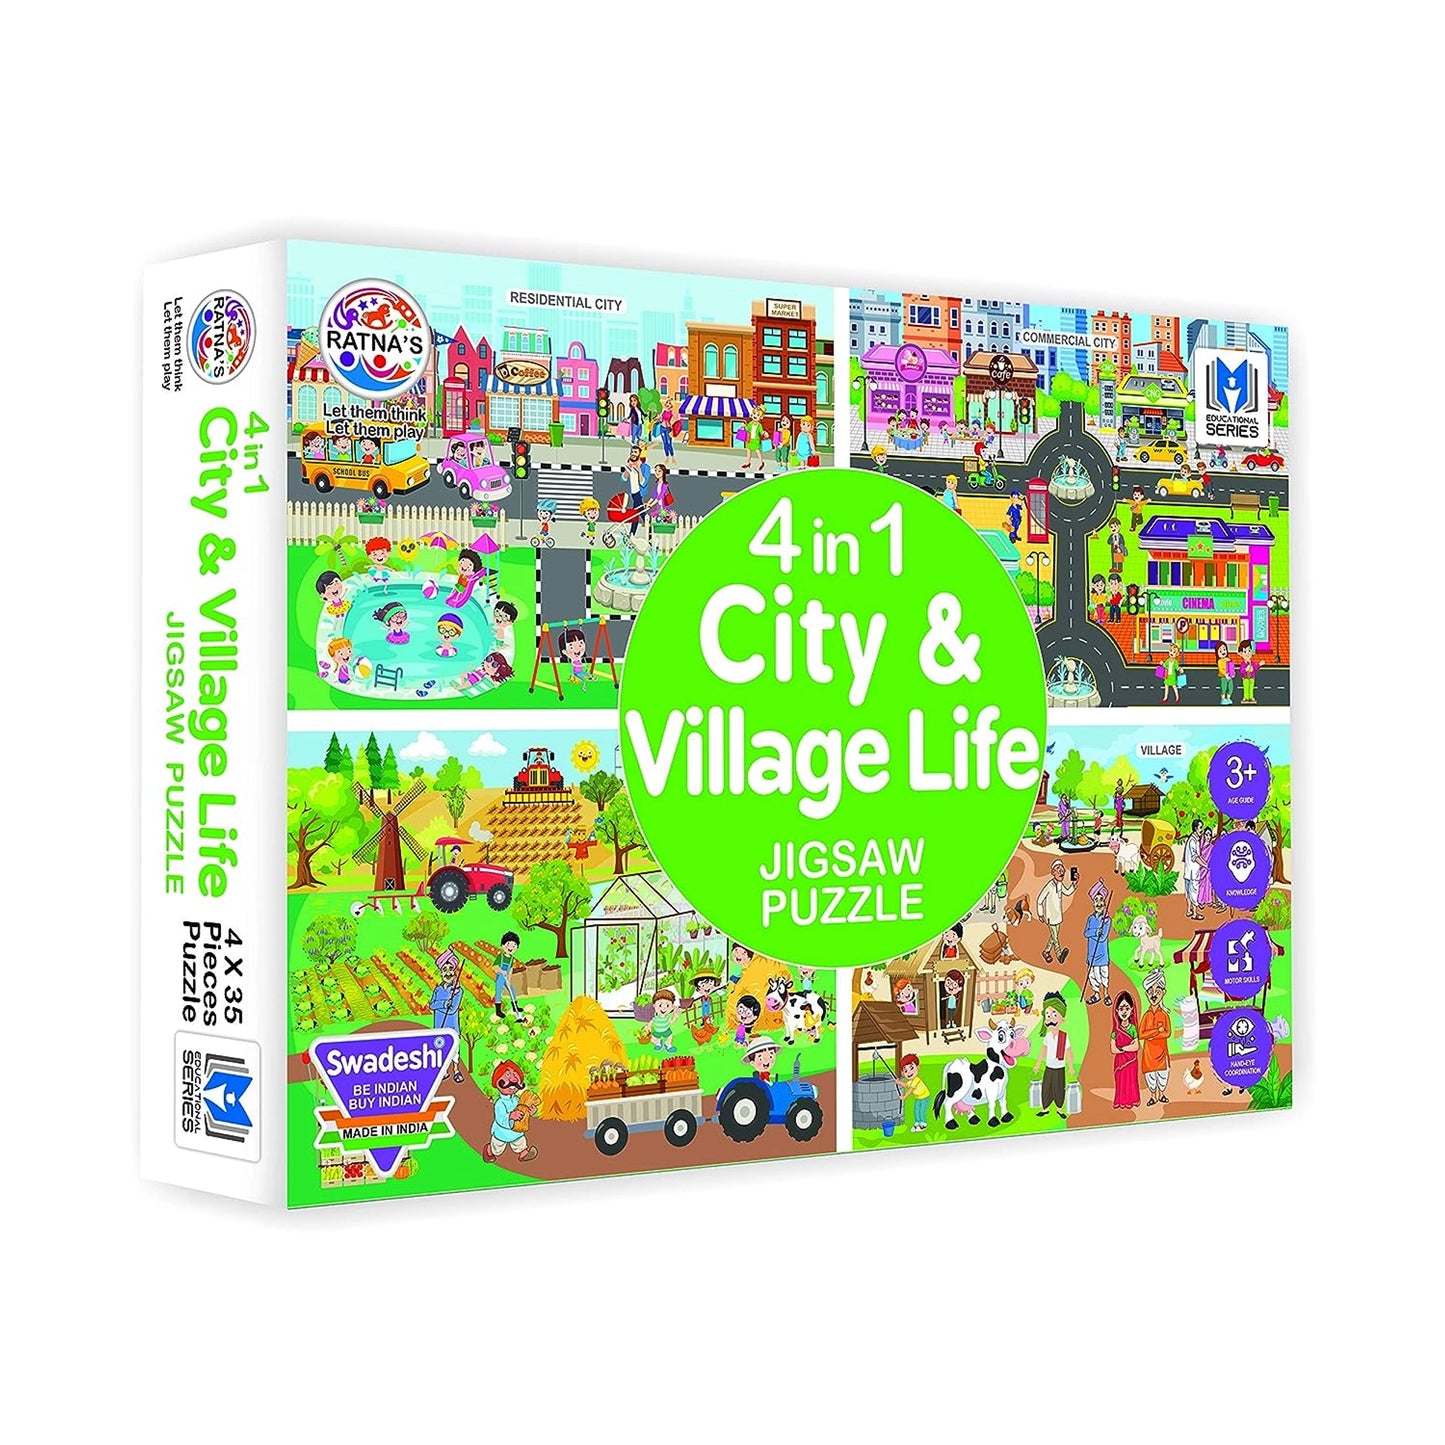 Ratna's 4-in-1 Educational Puzzles